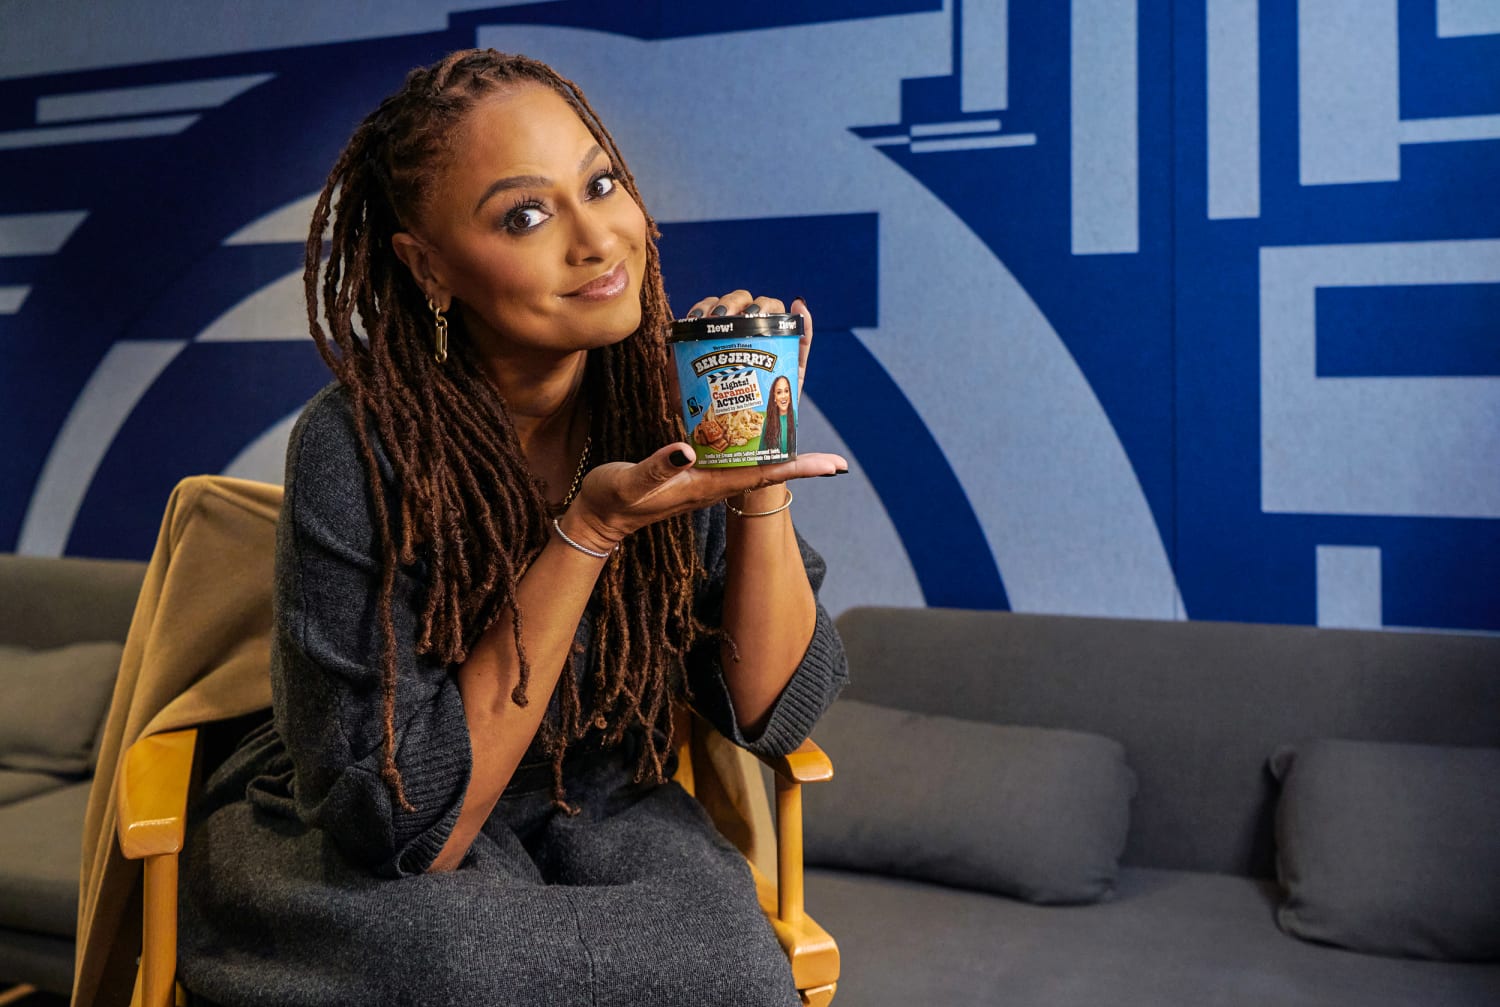 Ava DuVernay becomes the first Black woman featured on Ben & Jerry’s pint